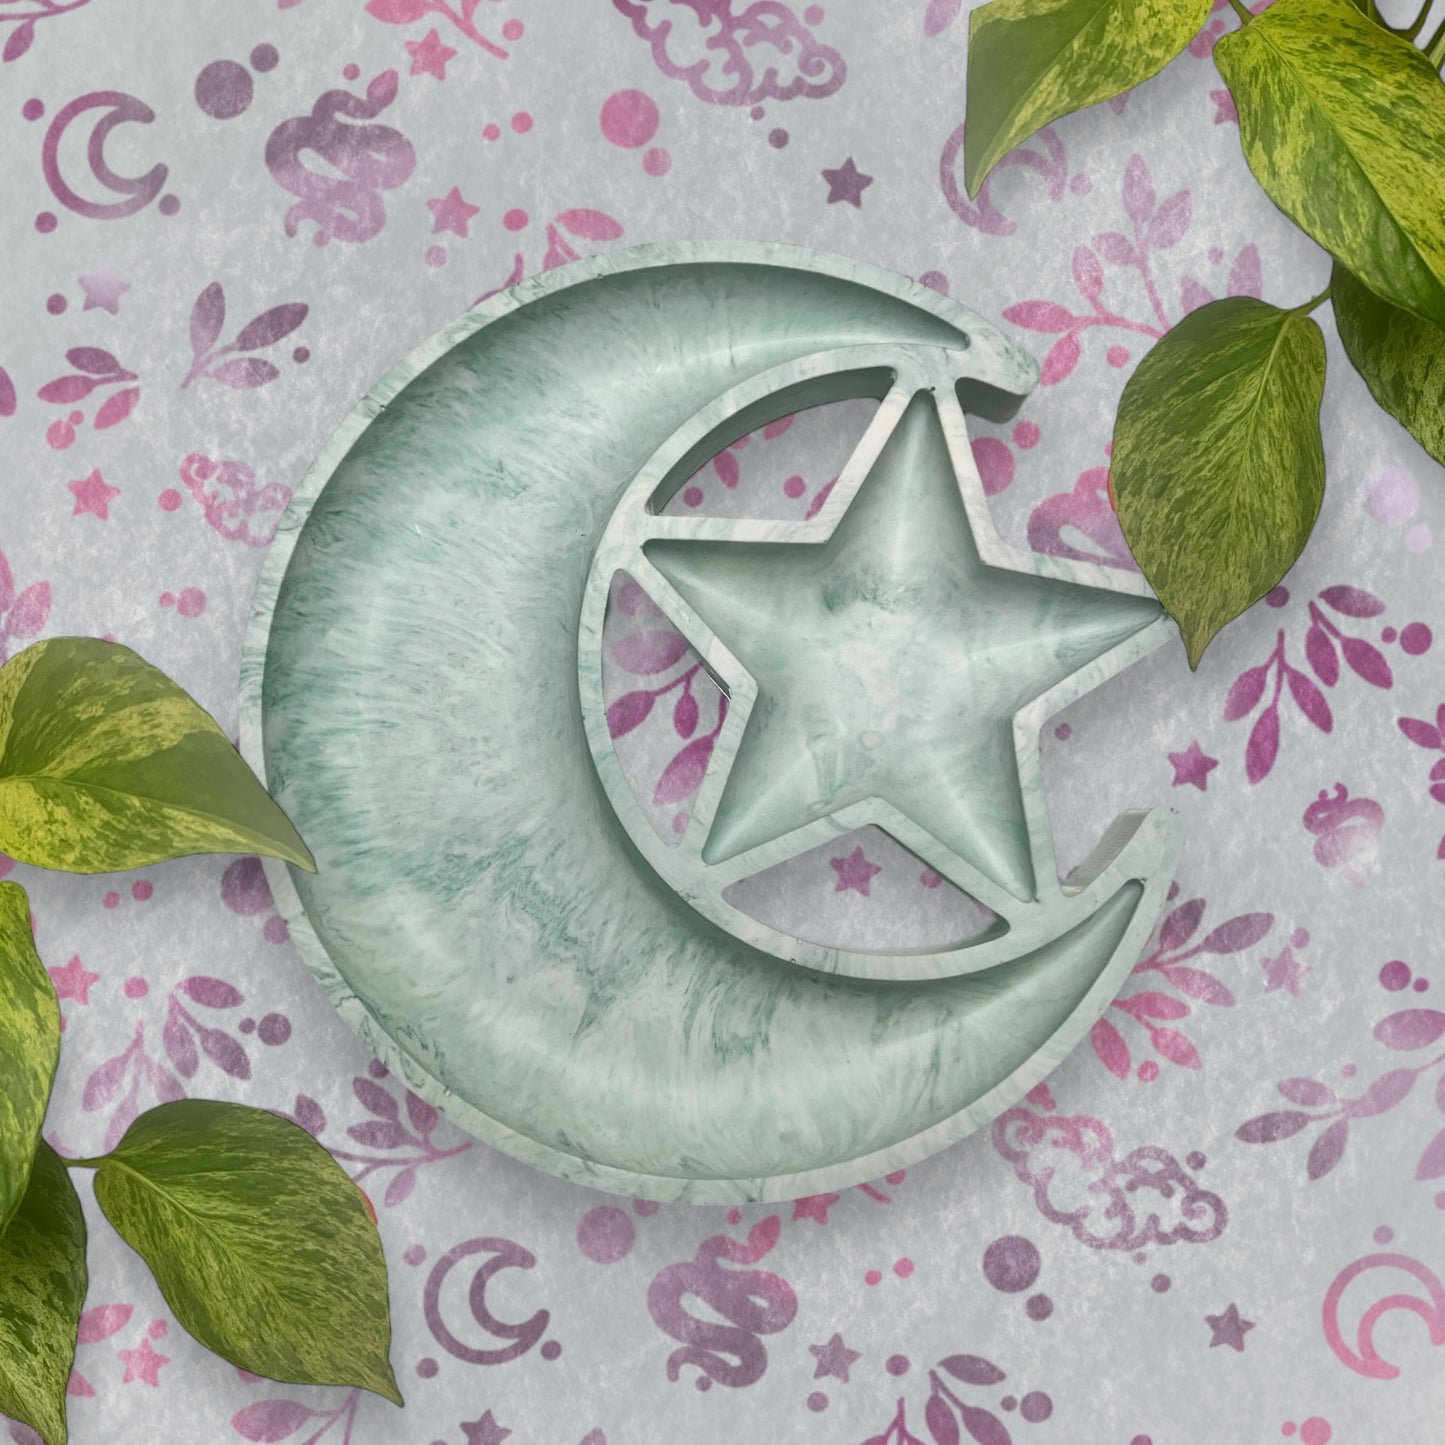 Trinket Tray - Green Moon and Star Marble Style Ring Dish